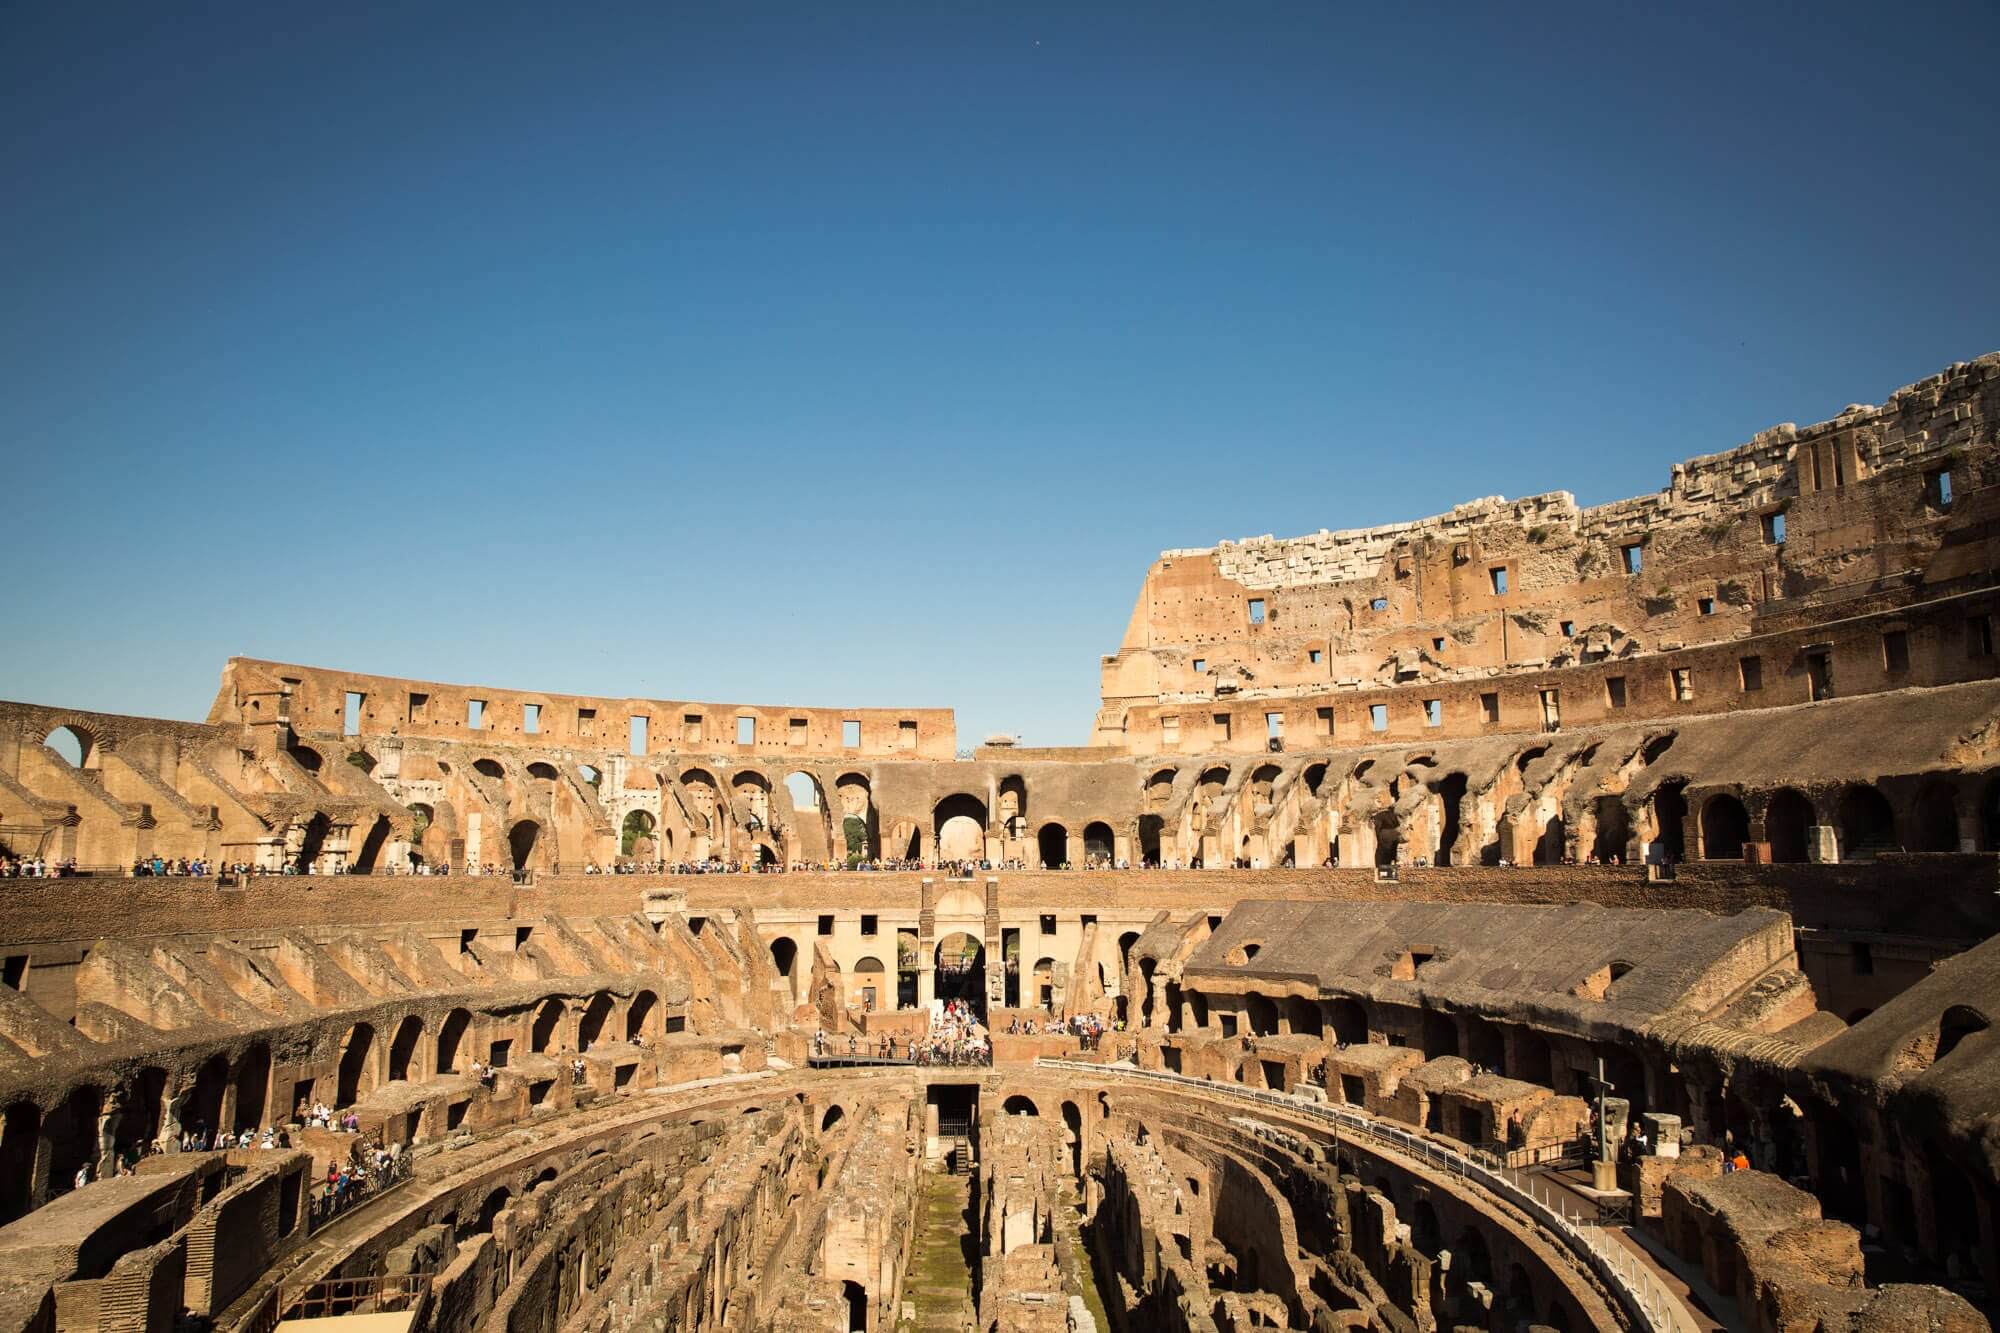 The interior of the Colosseum in Rome